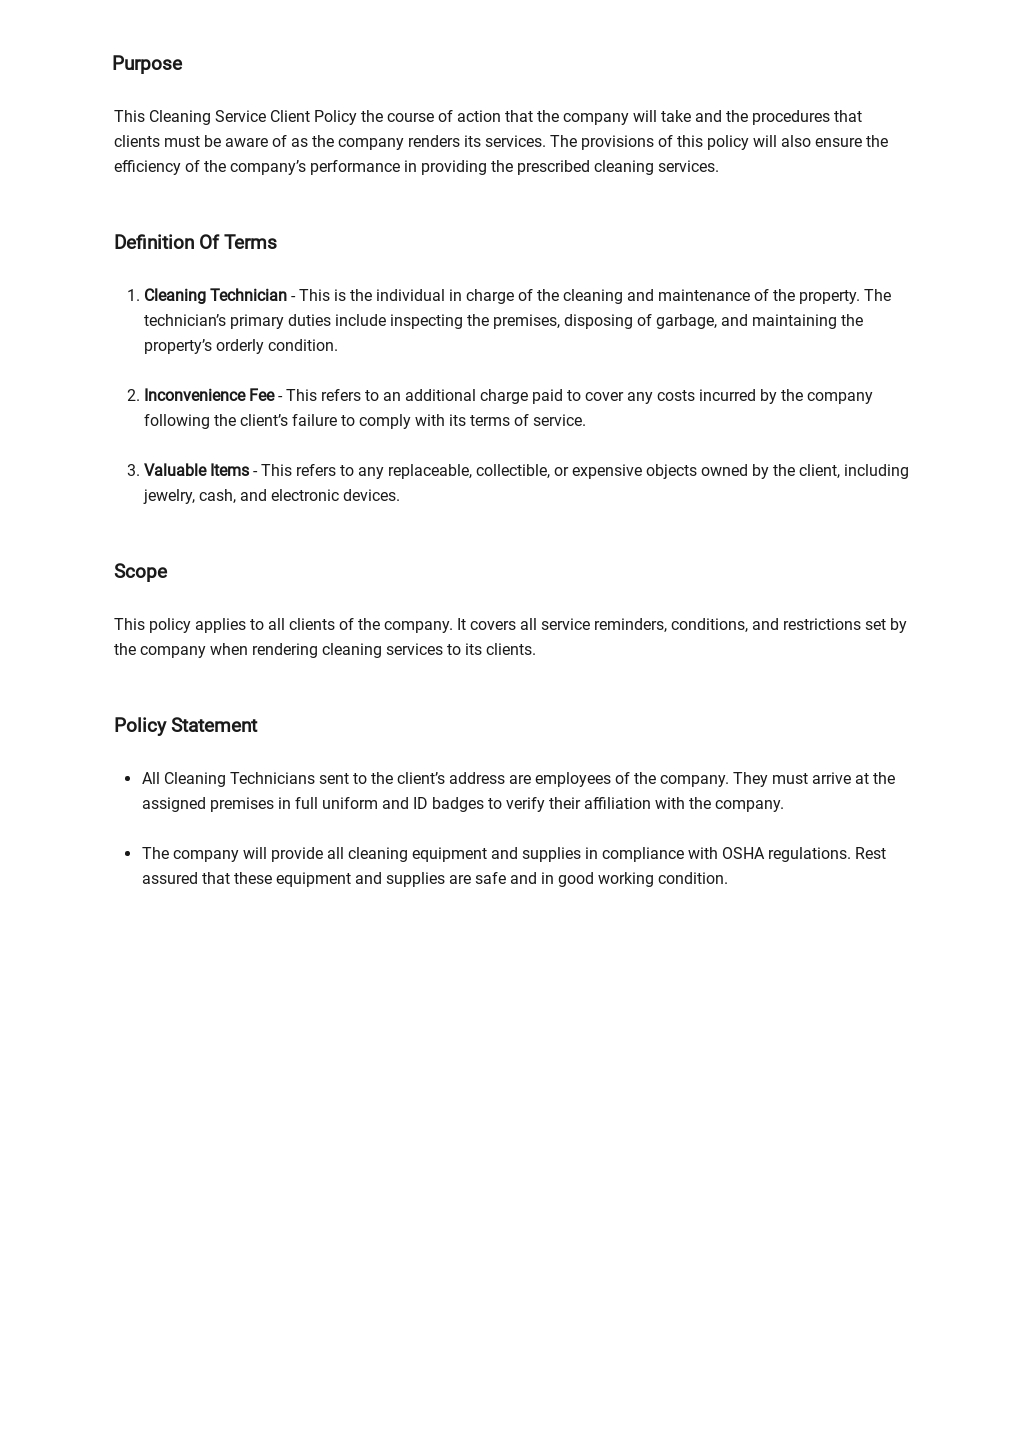 Cleaning Service Client Policy Template 1.jpe